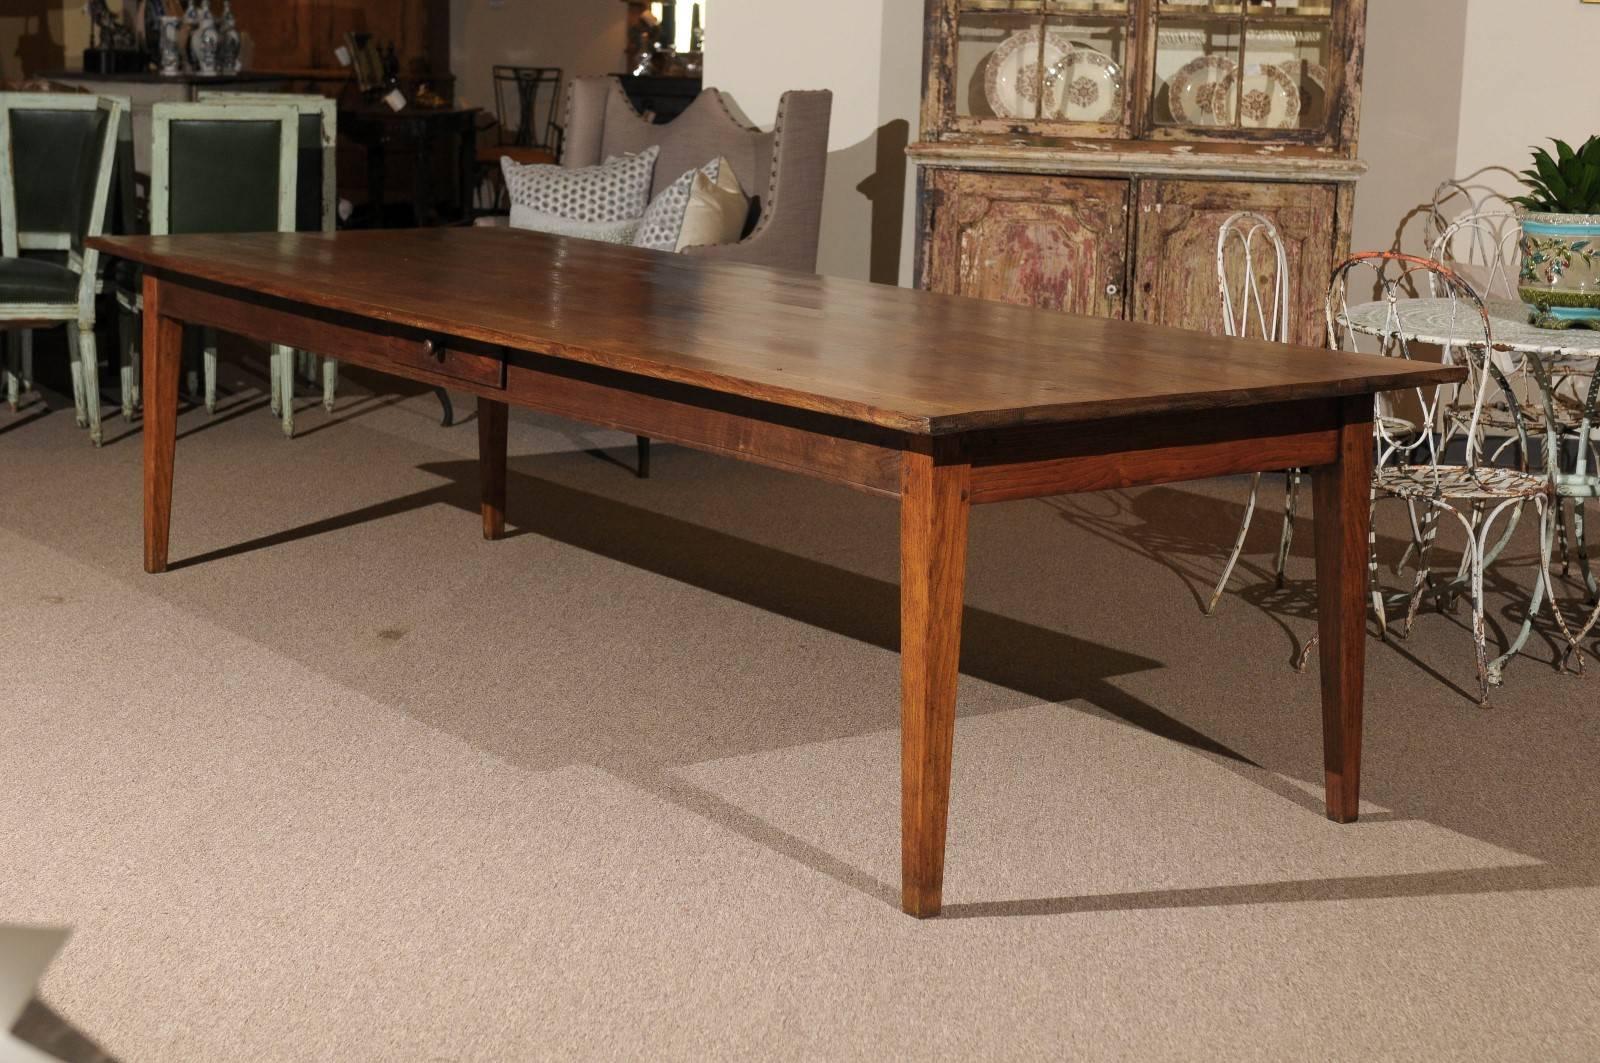 Large tables to seat 12 are difficult to find. We found this one in Normandy. The wood is chestnut and the tabletop has lots of interesting wood grain making it a beautiful and pleasing table to sit at. The color is very warm.